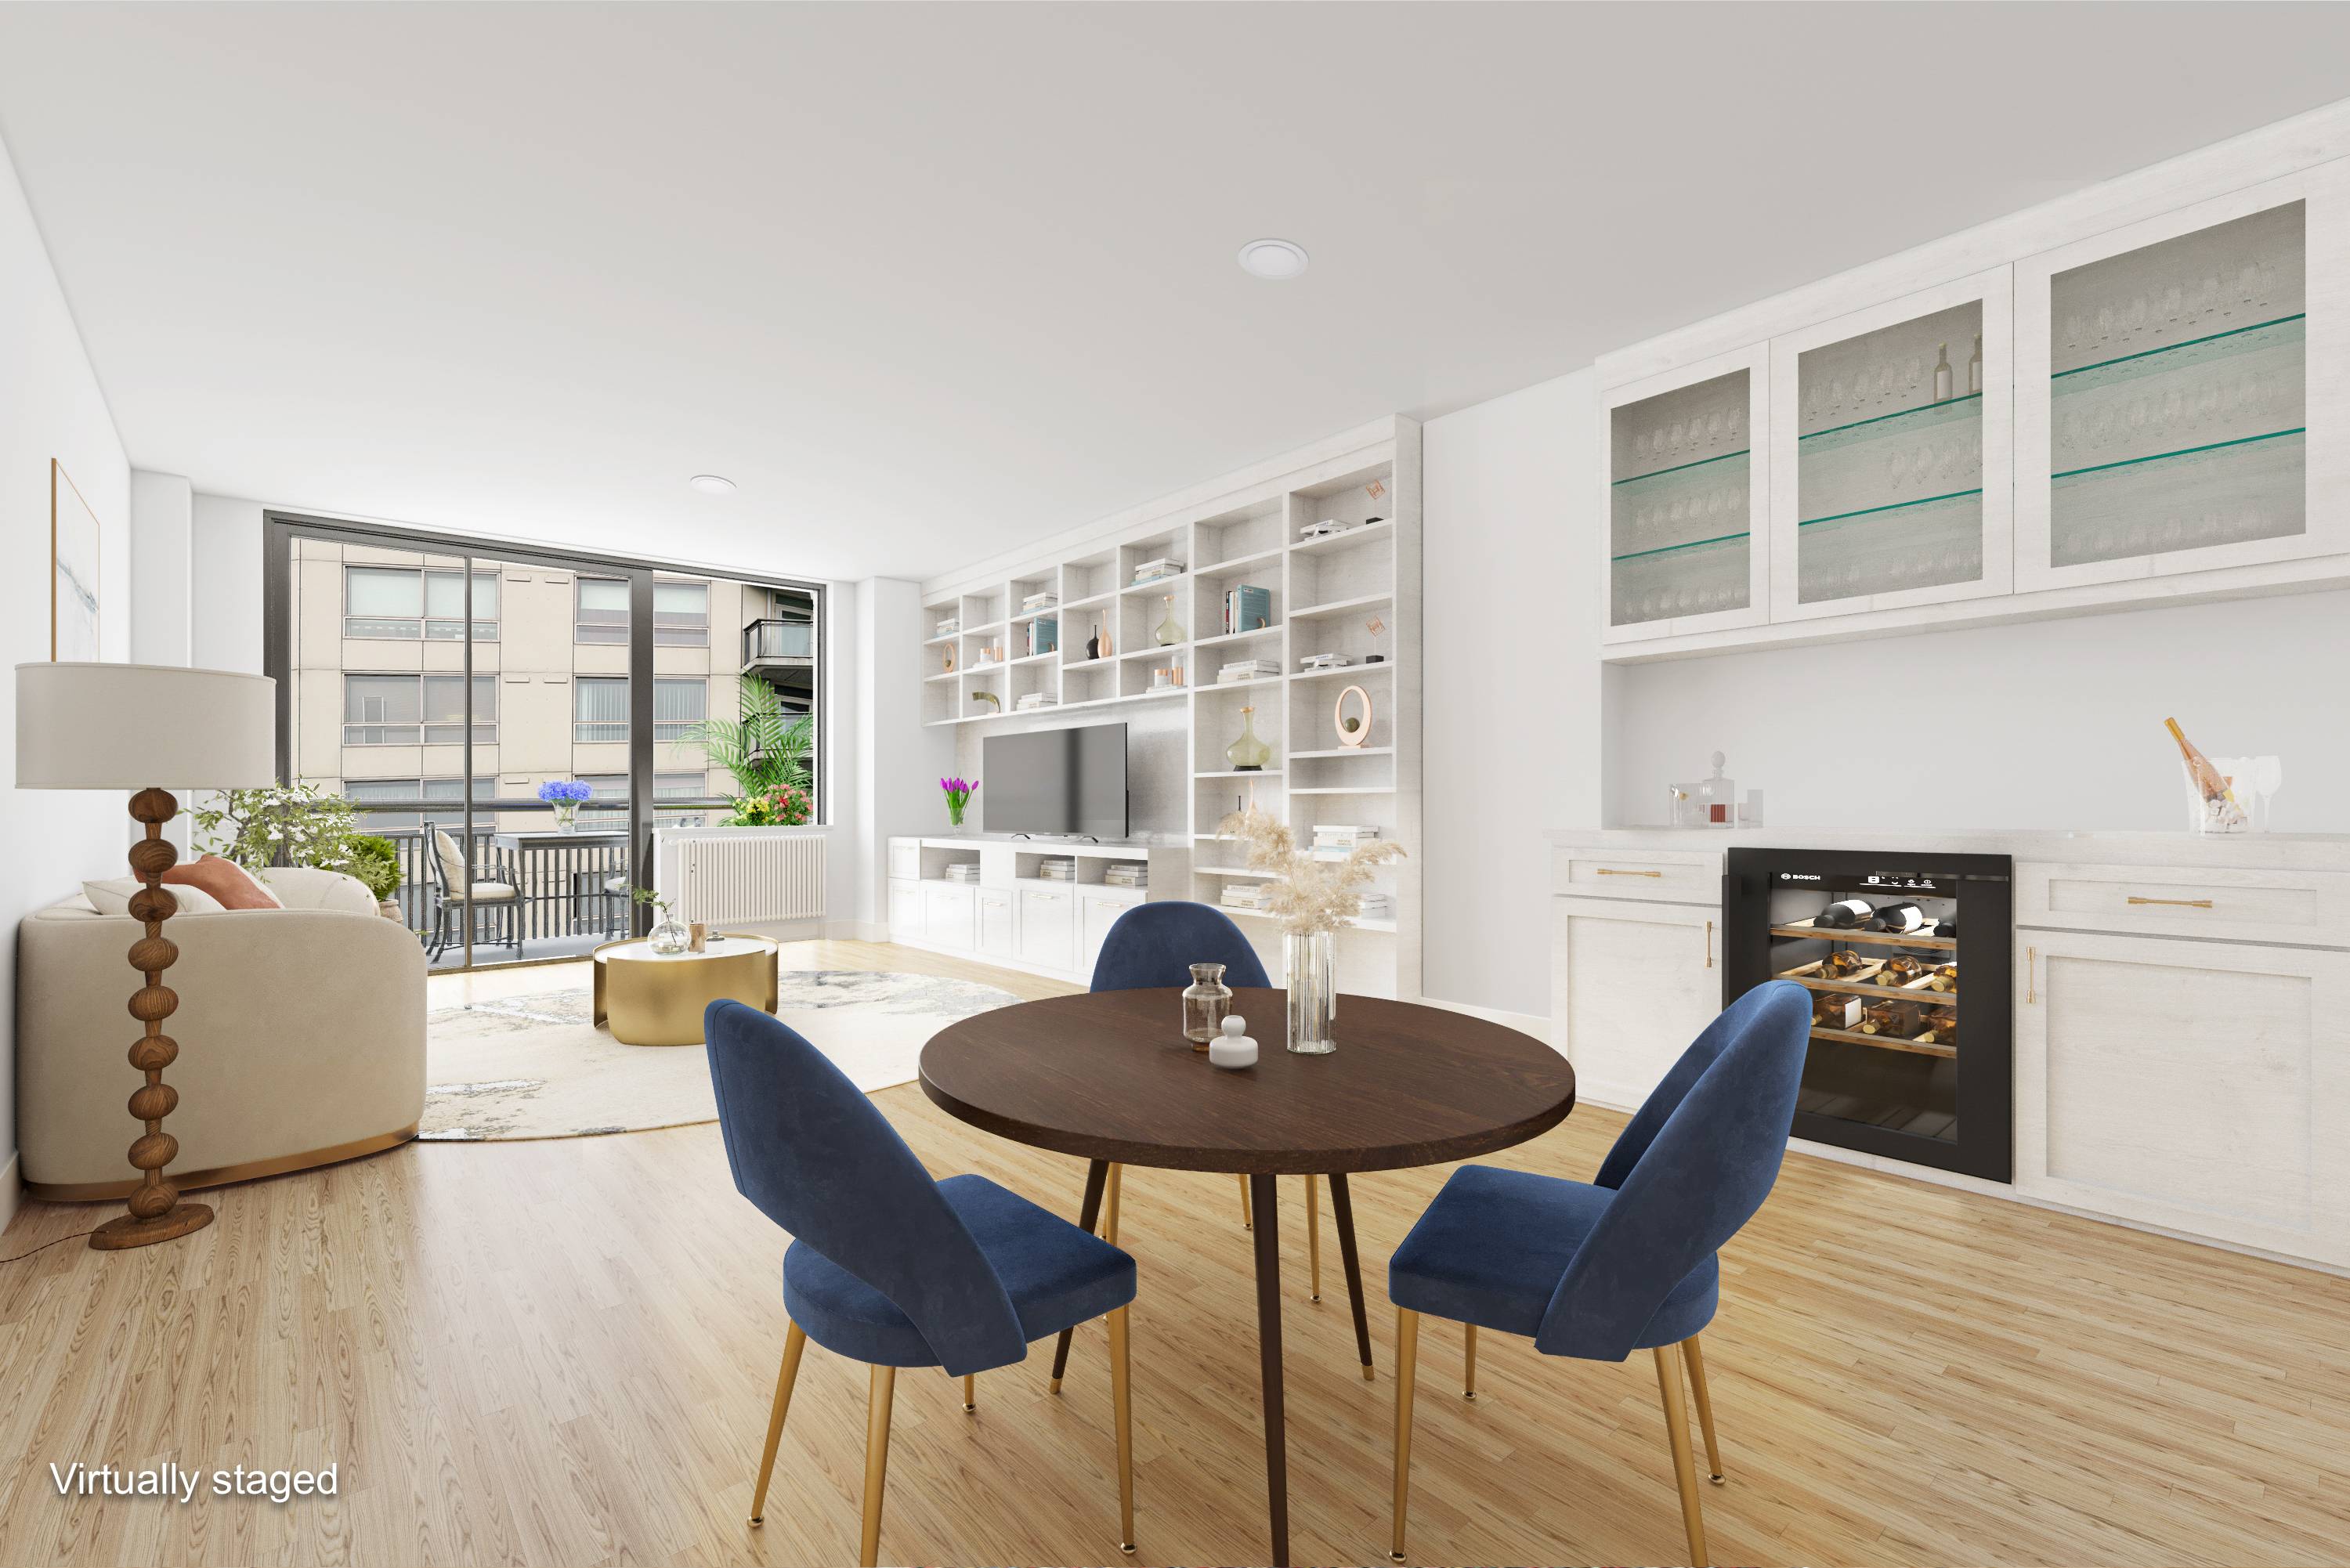 Residence 8C at 108 Fifth Avenue is a one bedroom condo located in the heart of the Flatiron neighborhood.